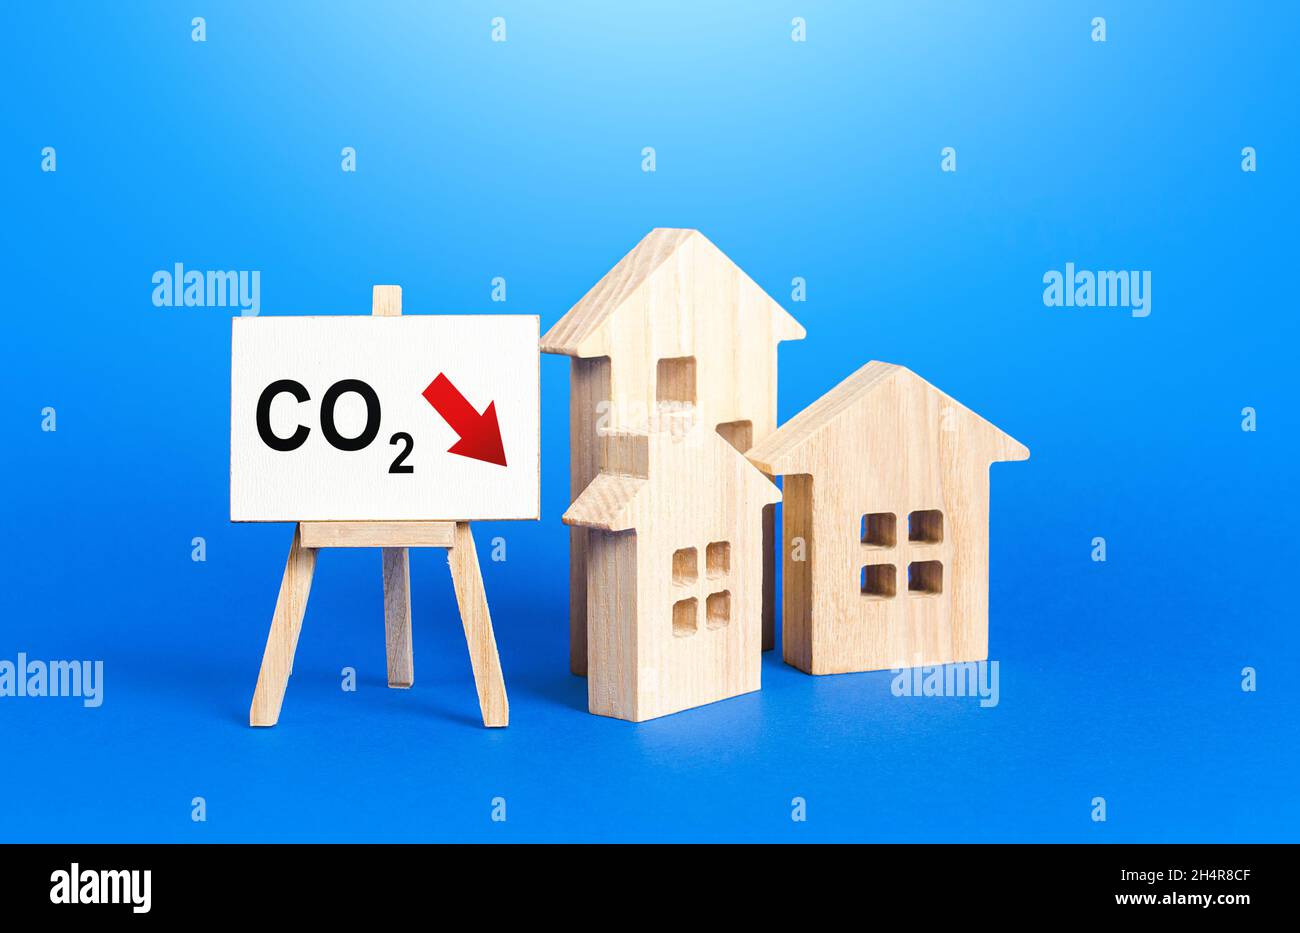 Reducing greenhouse gas emissions from housing. Environmentally friendly. Improving energy efficiency. Carbon neutral. Low impact on environment. Deca Stock Photo